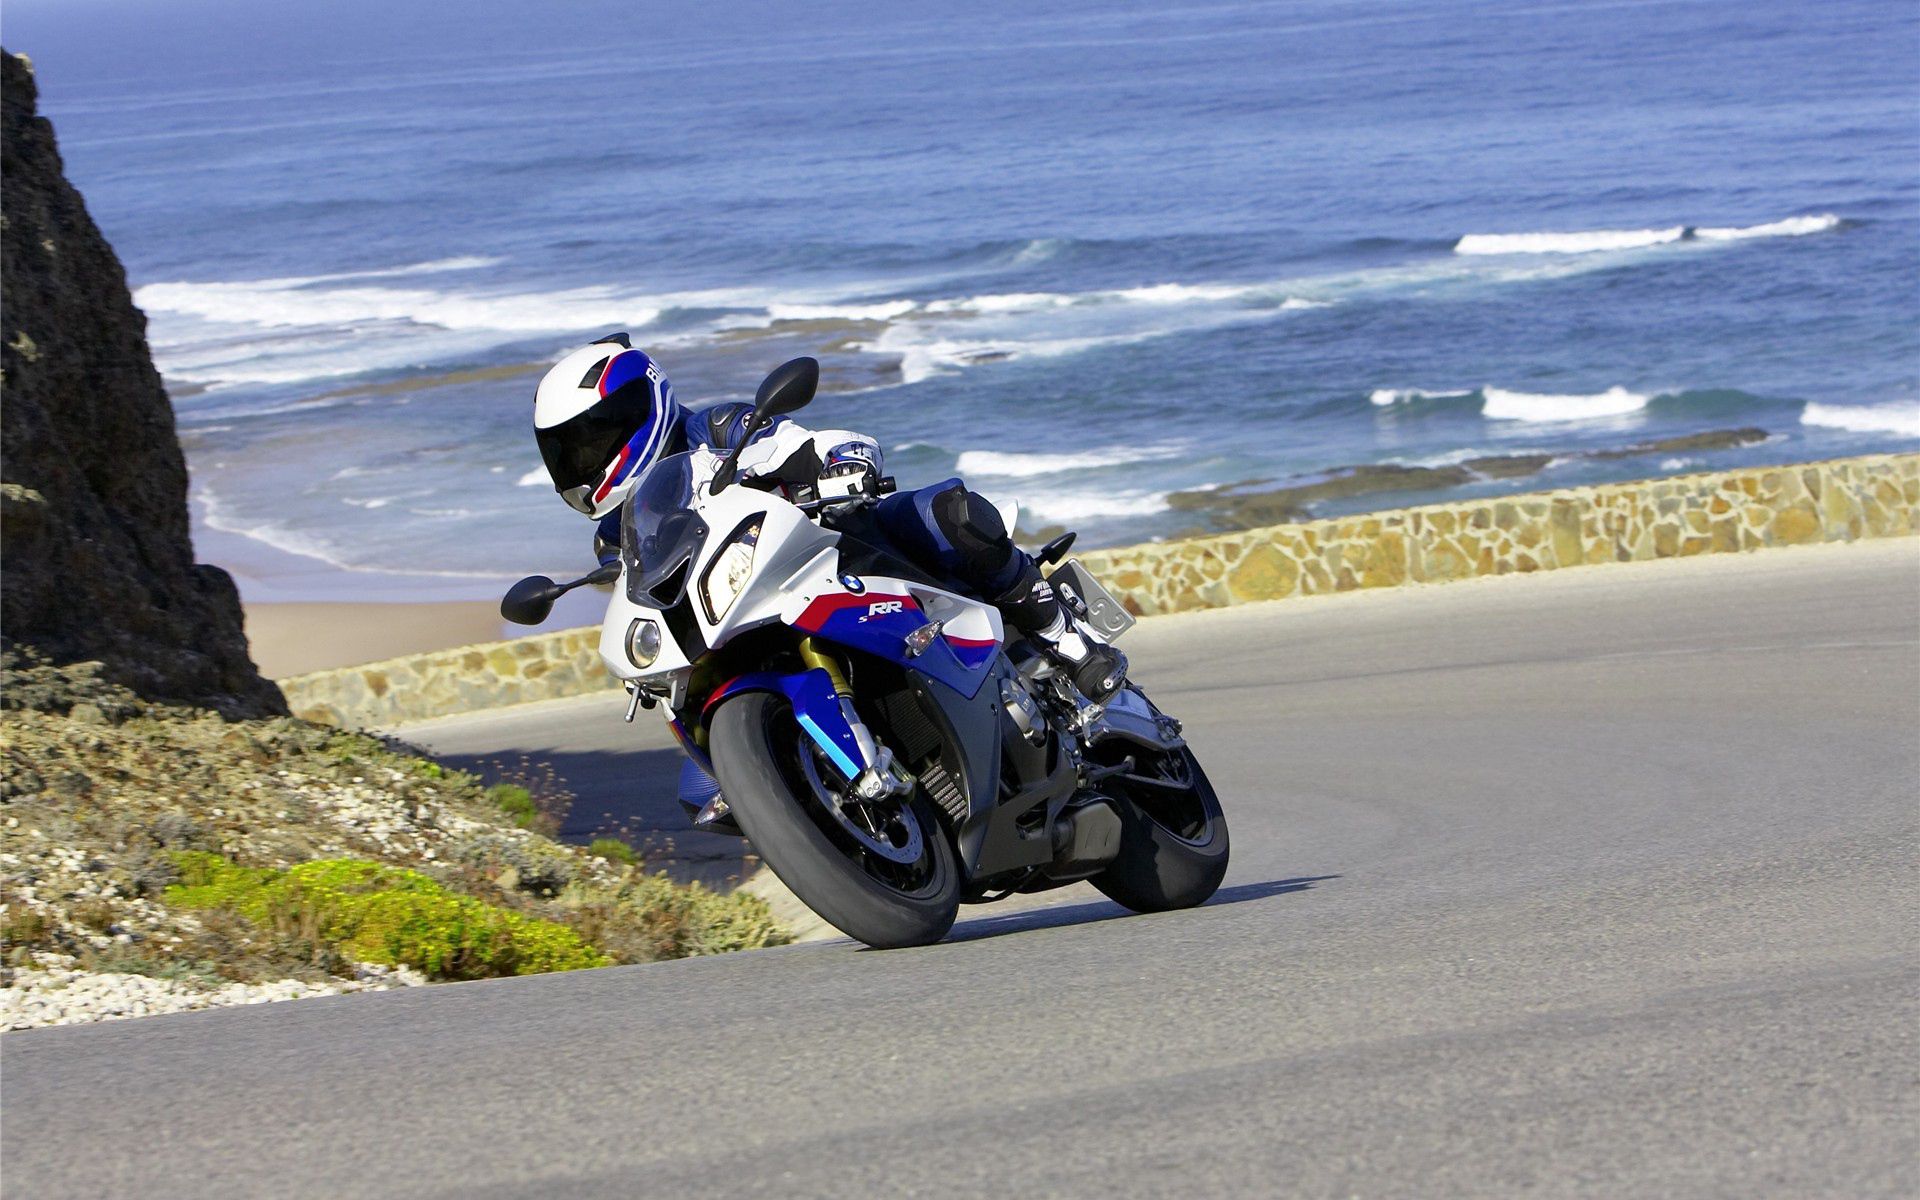 speed, bmw s1000rr, motorcycles, bmw, turn, motorcycle